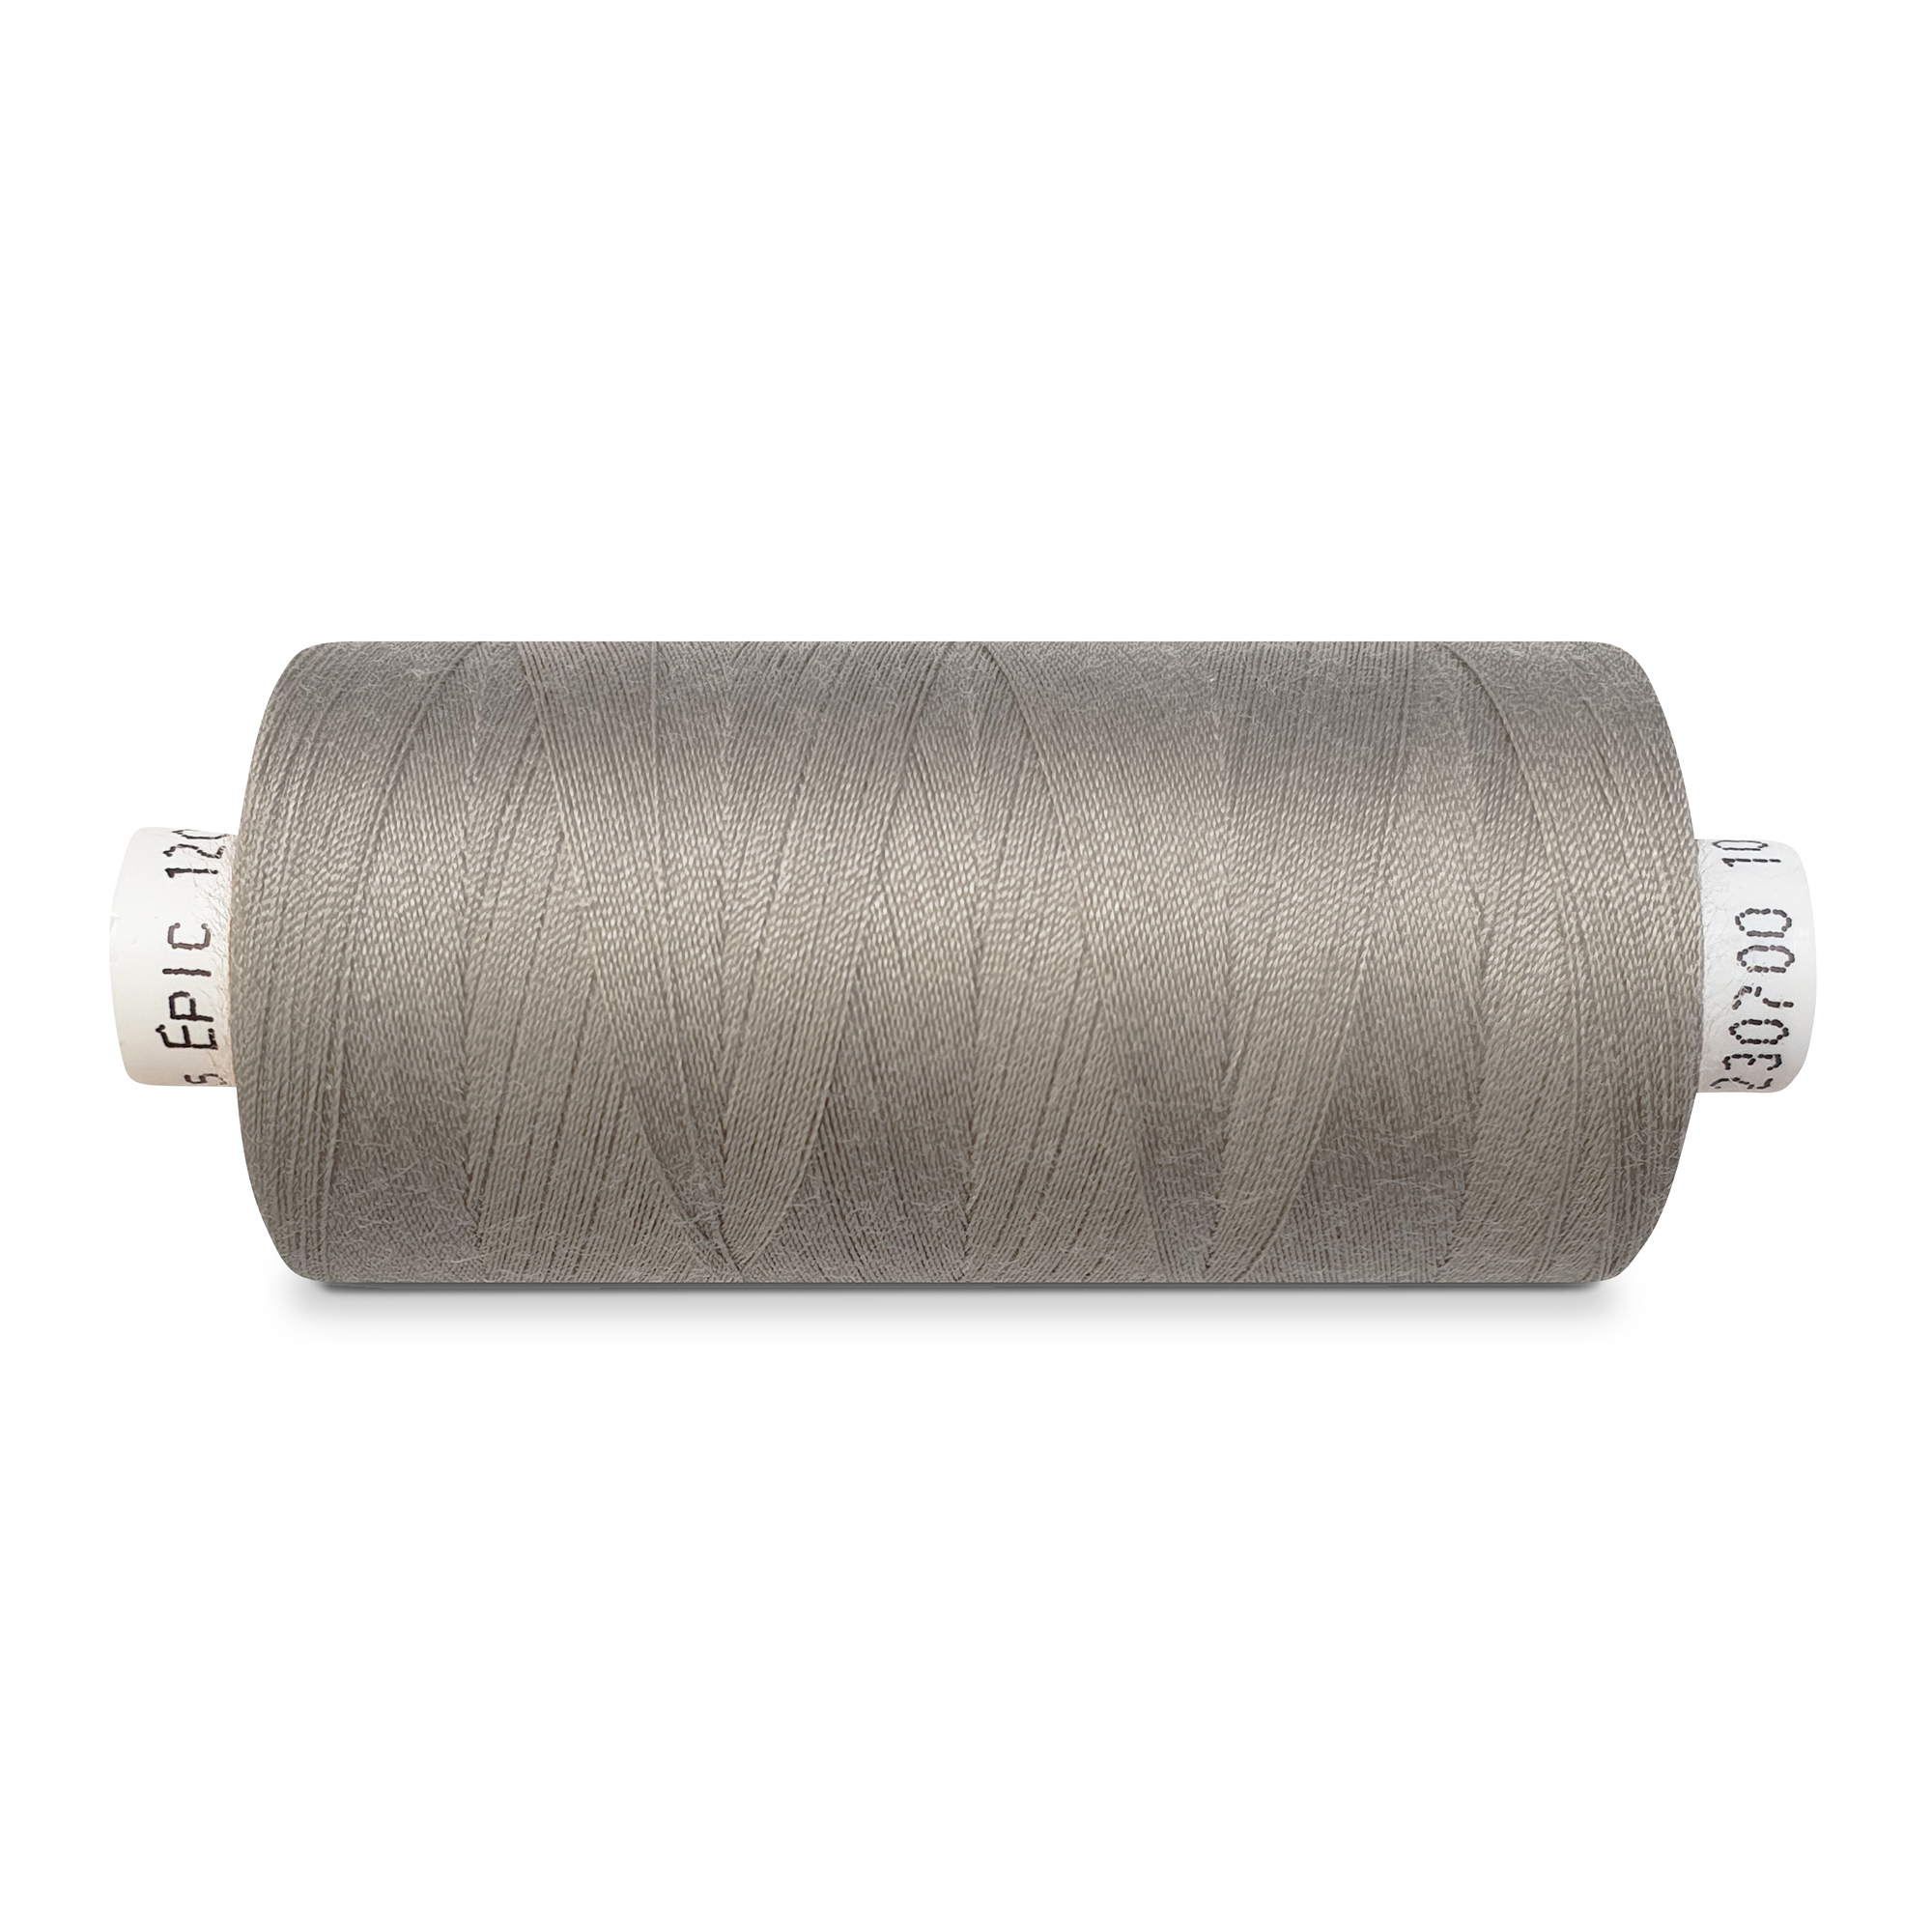 Leather/Sewing thread colonial (grey beige)